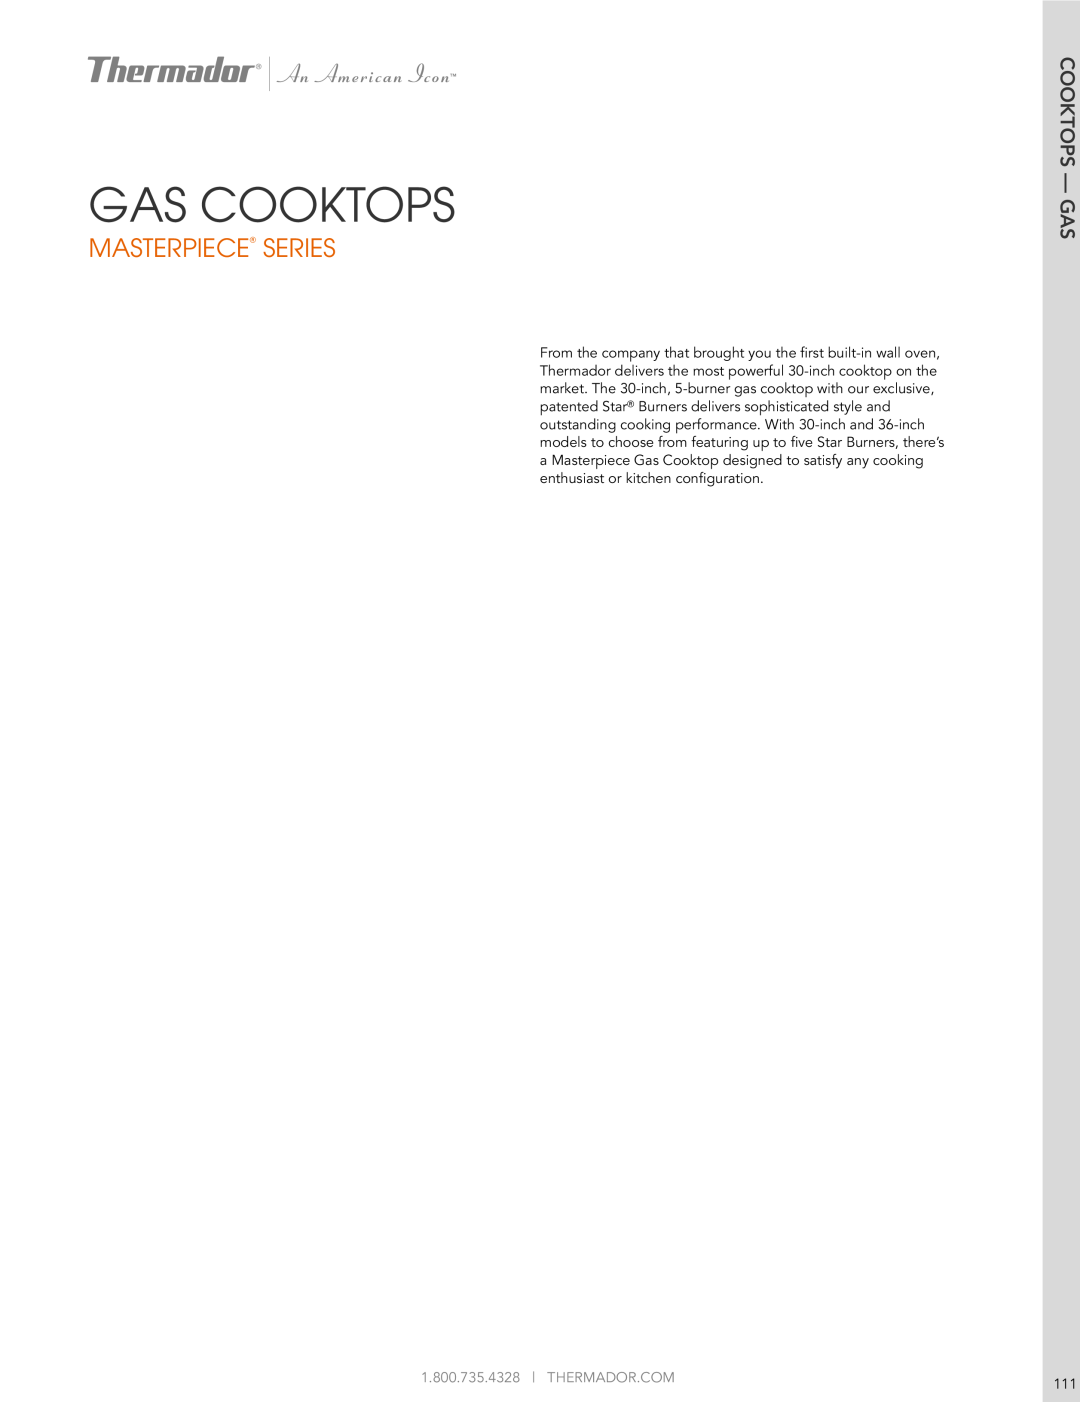 Thermador SGSX365FS manual Cooktops - Gas, Gas Cooktops, Masterpiece Series 